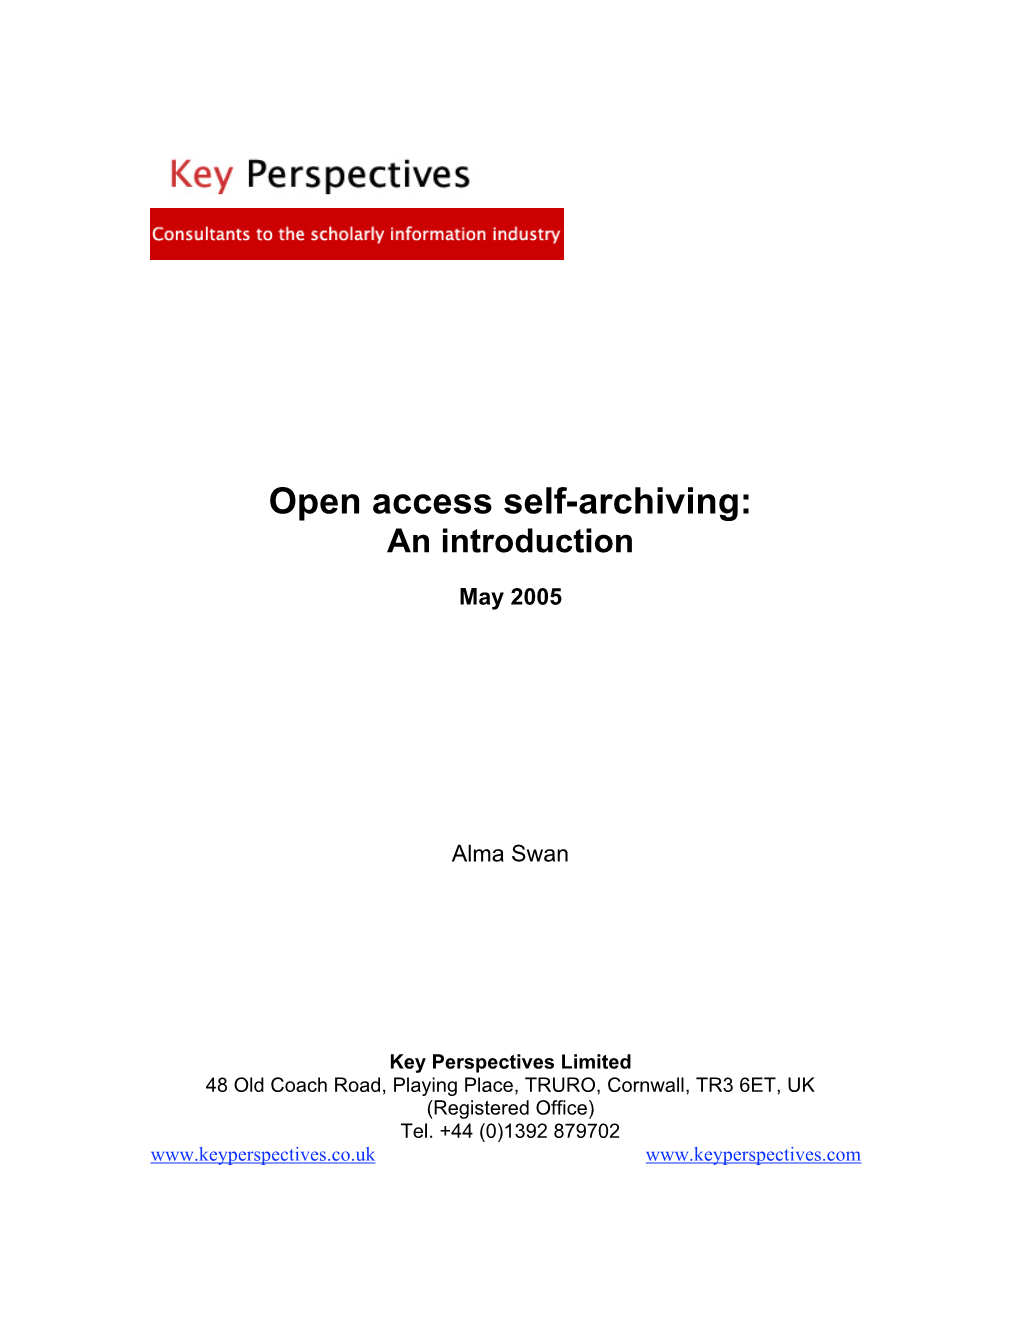 Open Access Self-Archiving: an Introduction